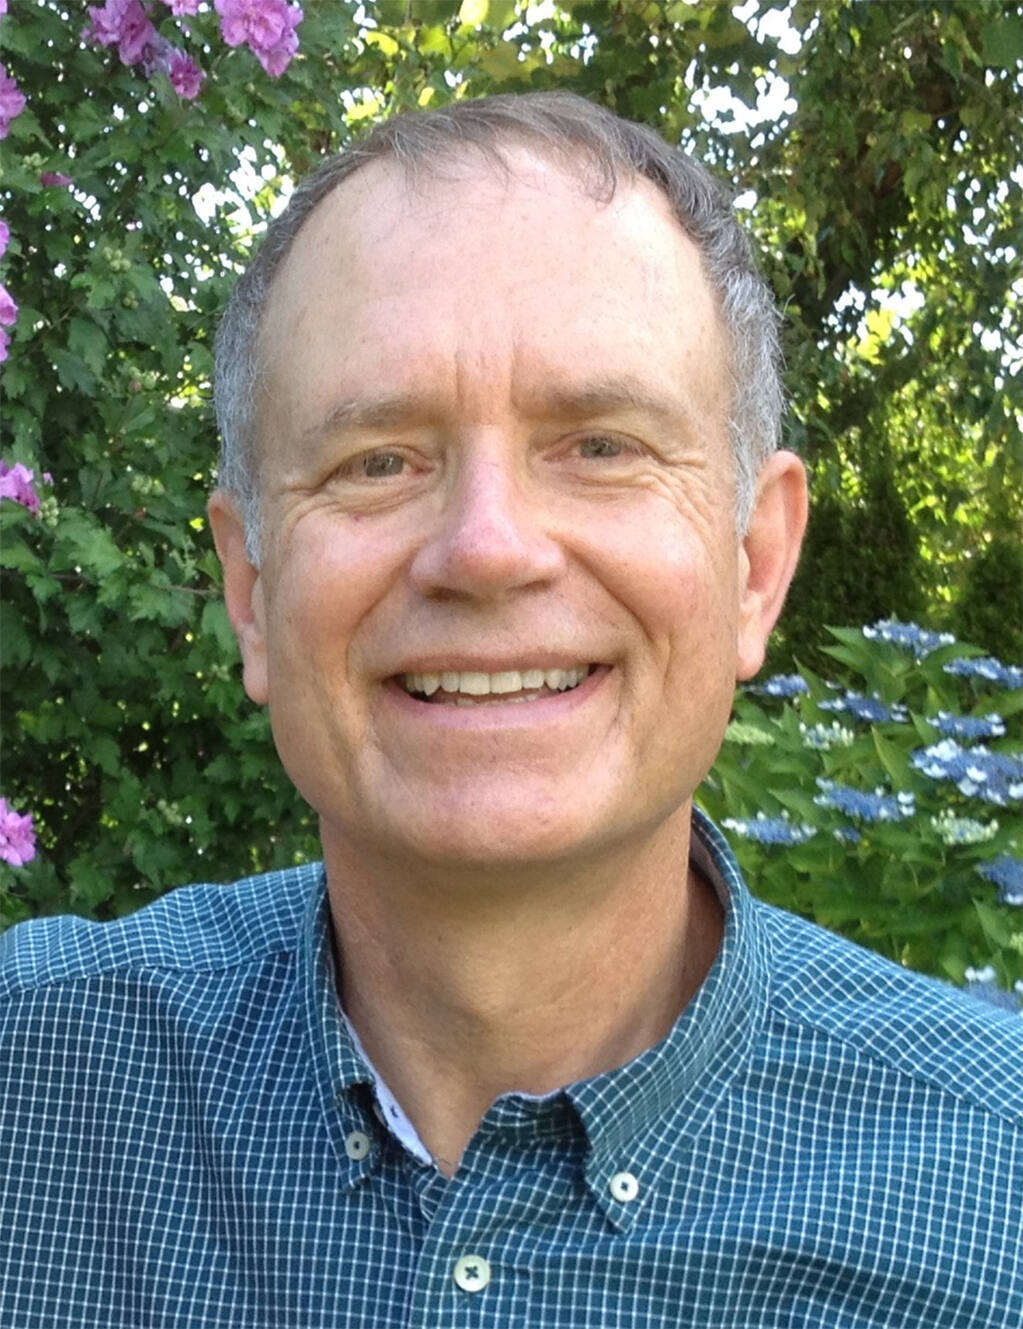 Jeff Langley profile picture in front of greenery and some flowers